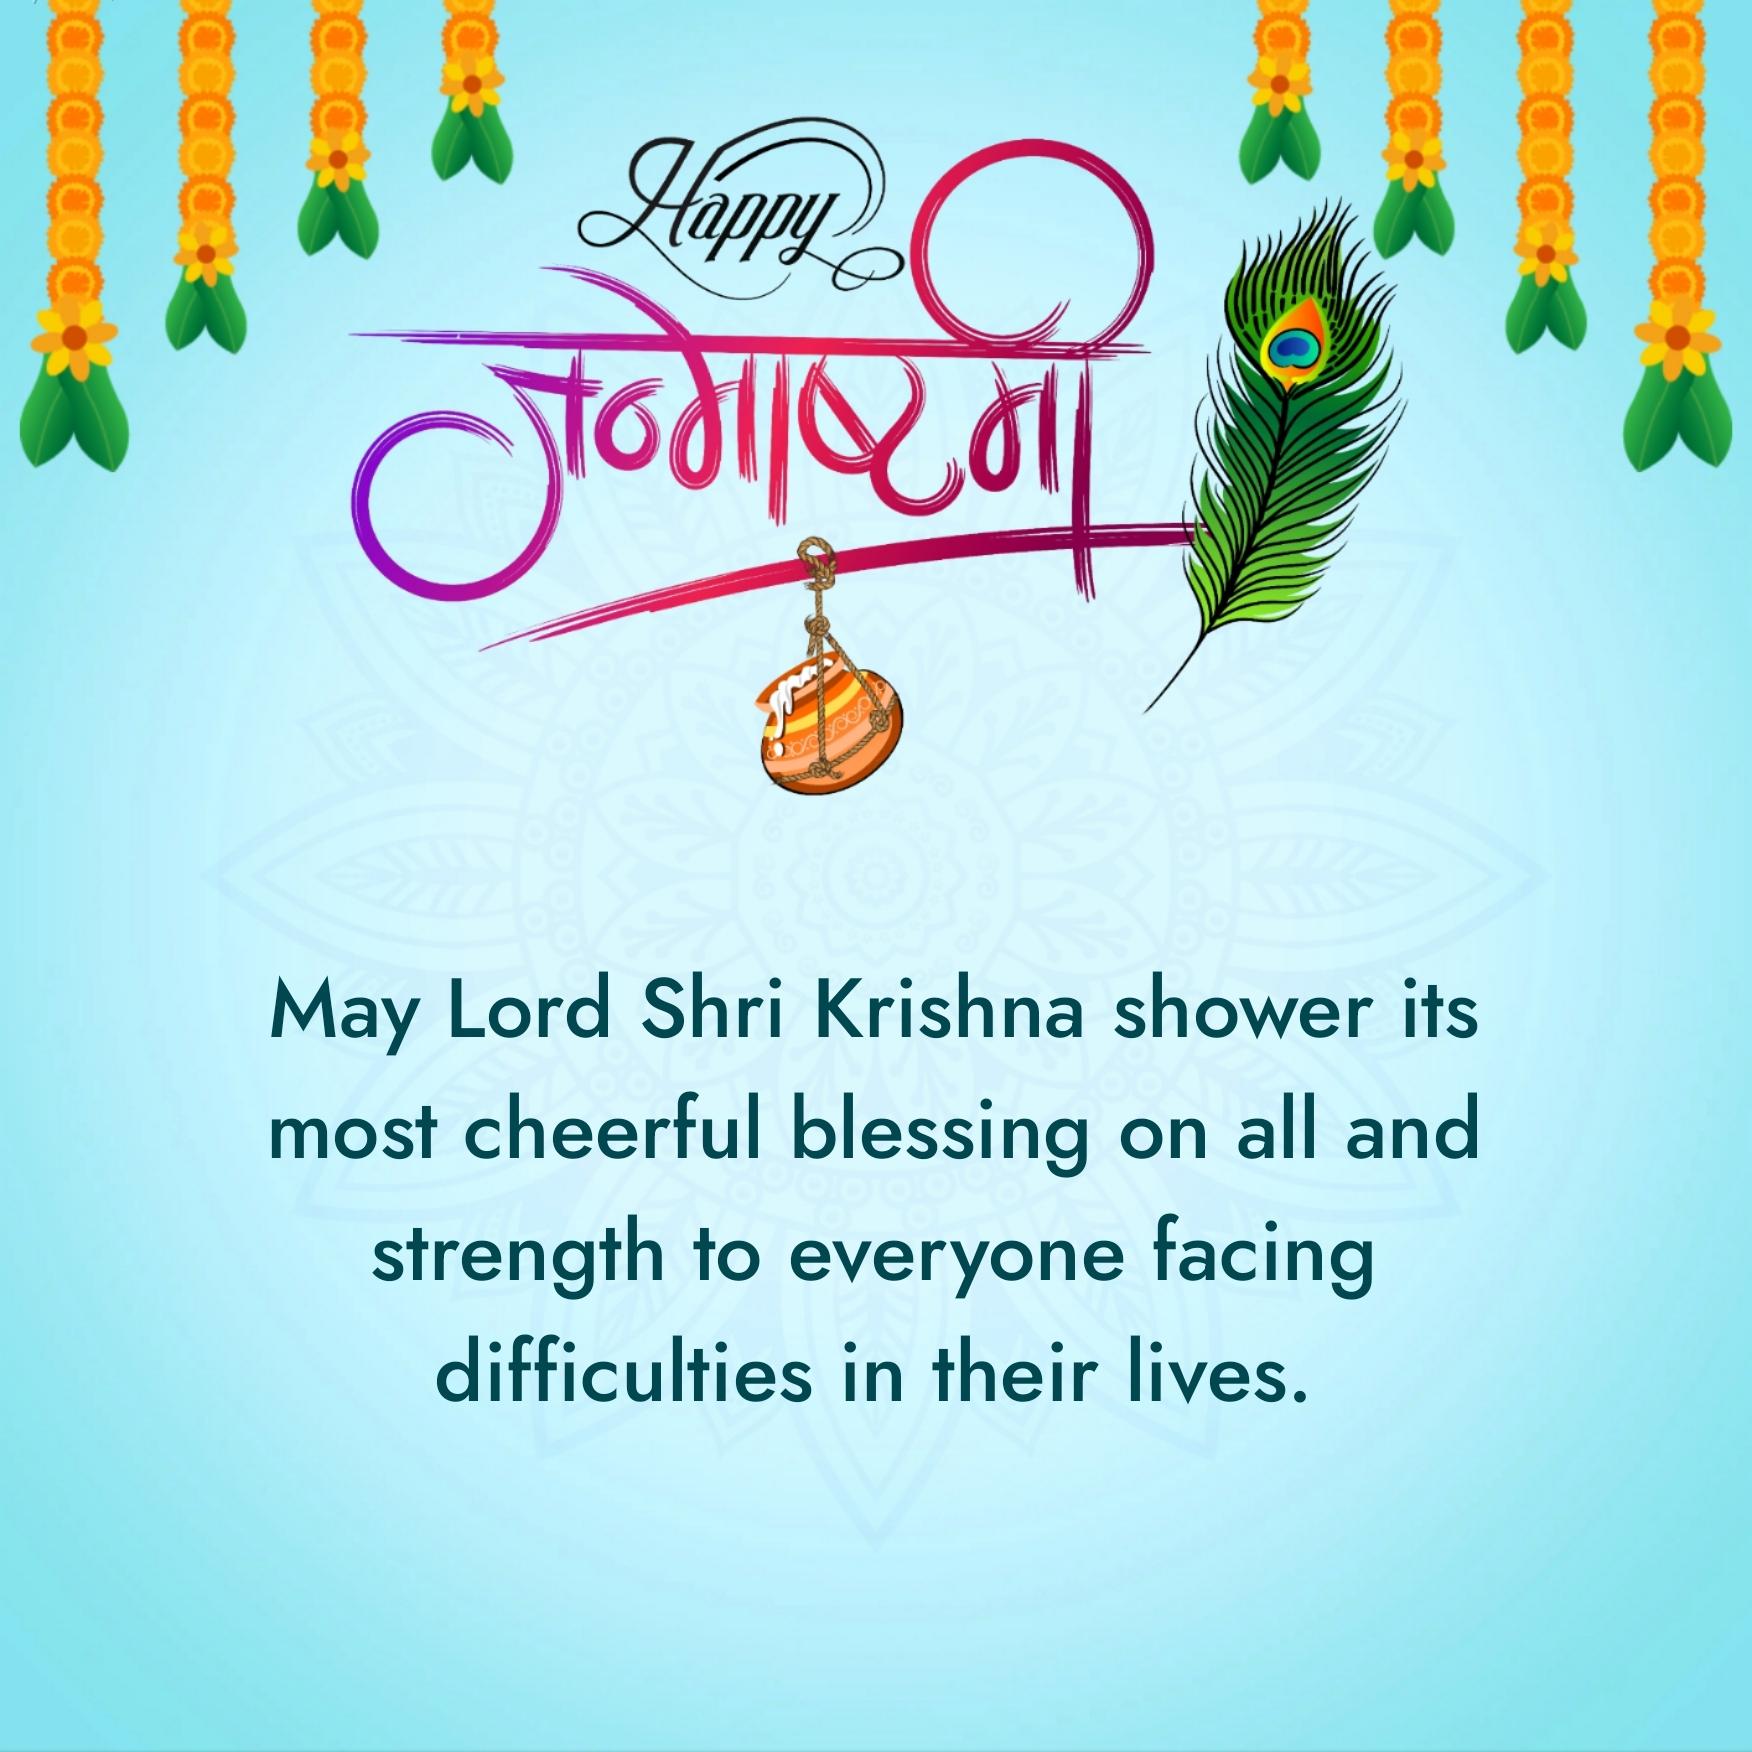 May Lord Shri Krishna shower its most cheerful blessing